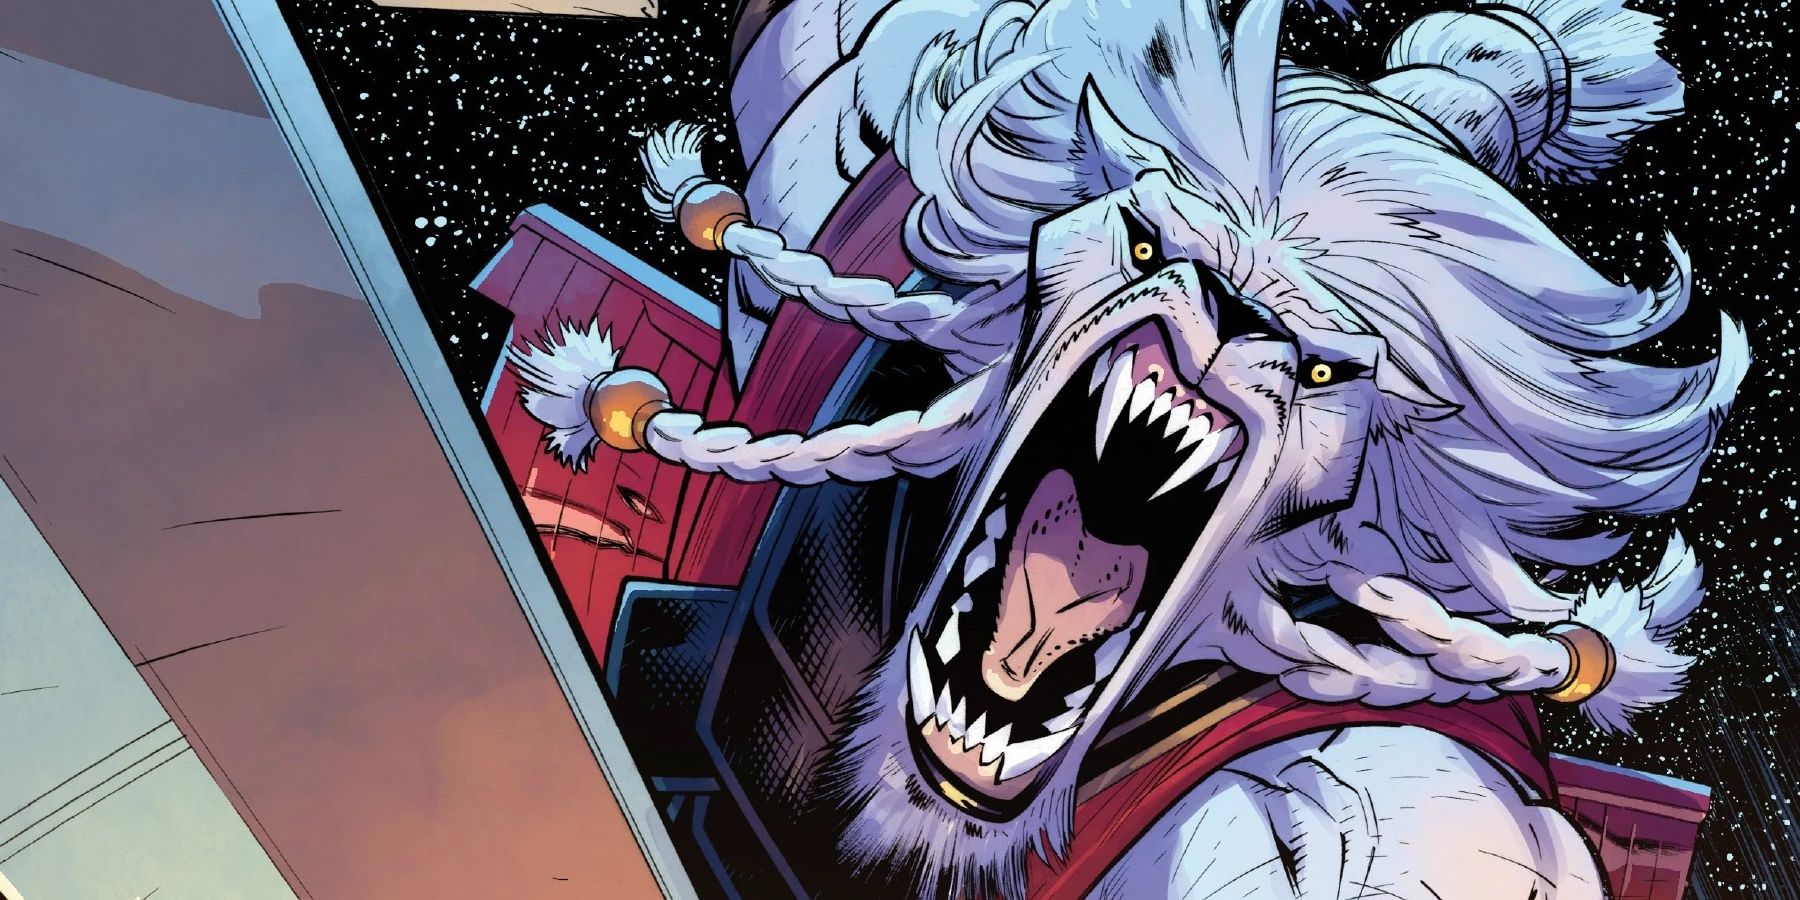 Battle Beast in space, showing off his teeth and blade